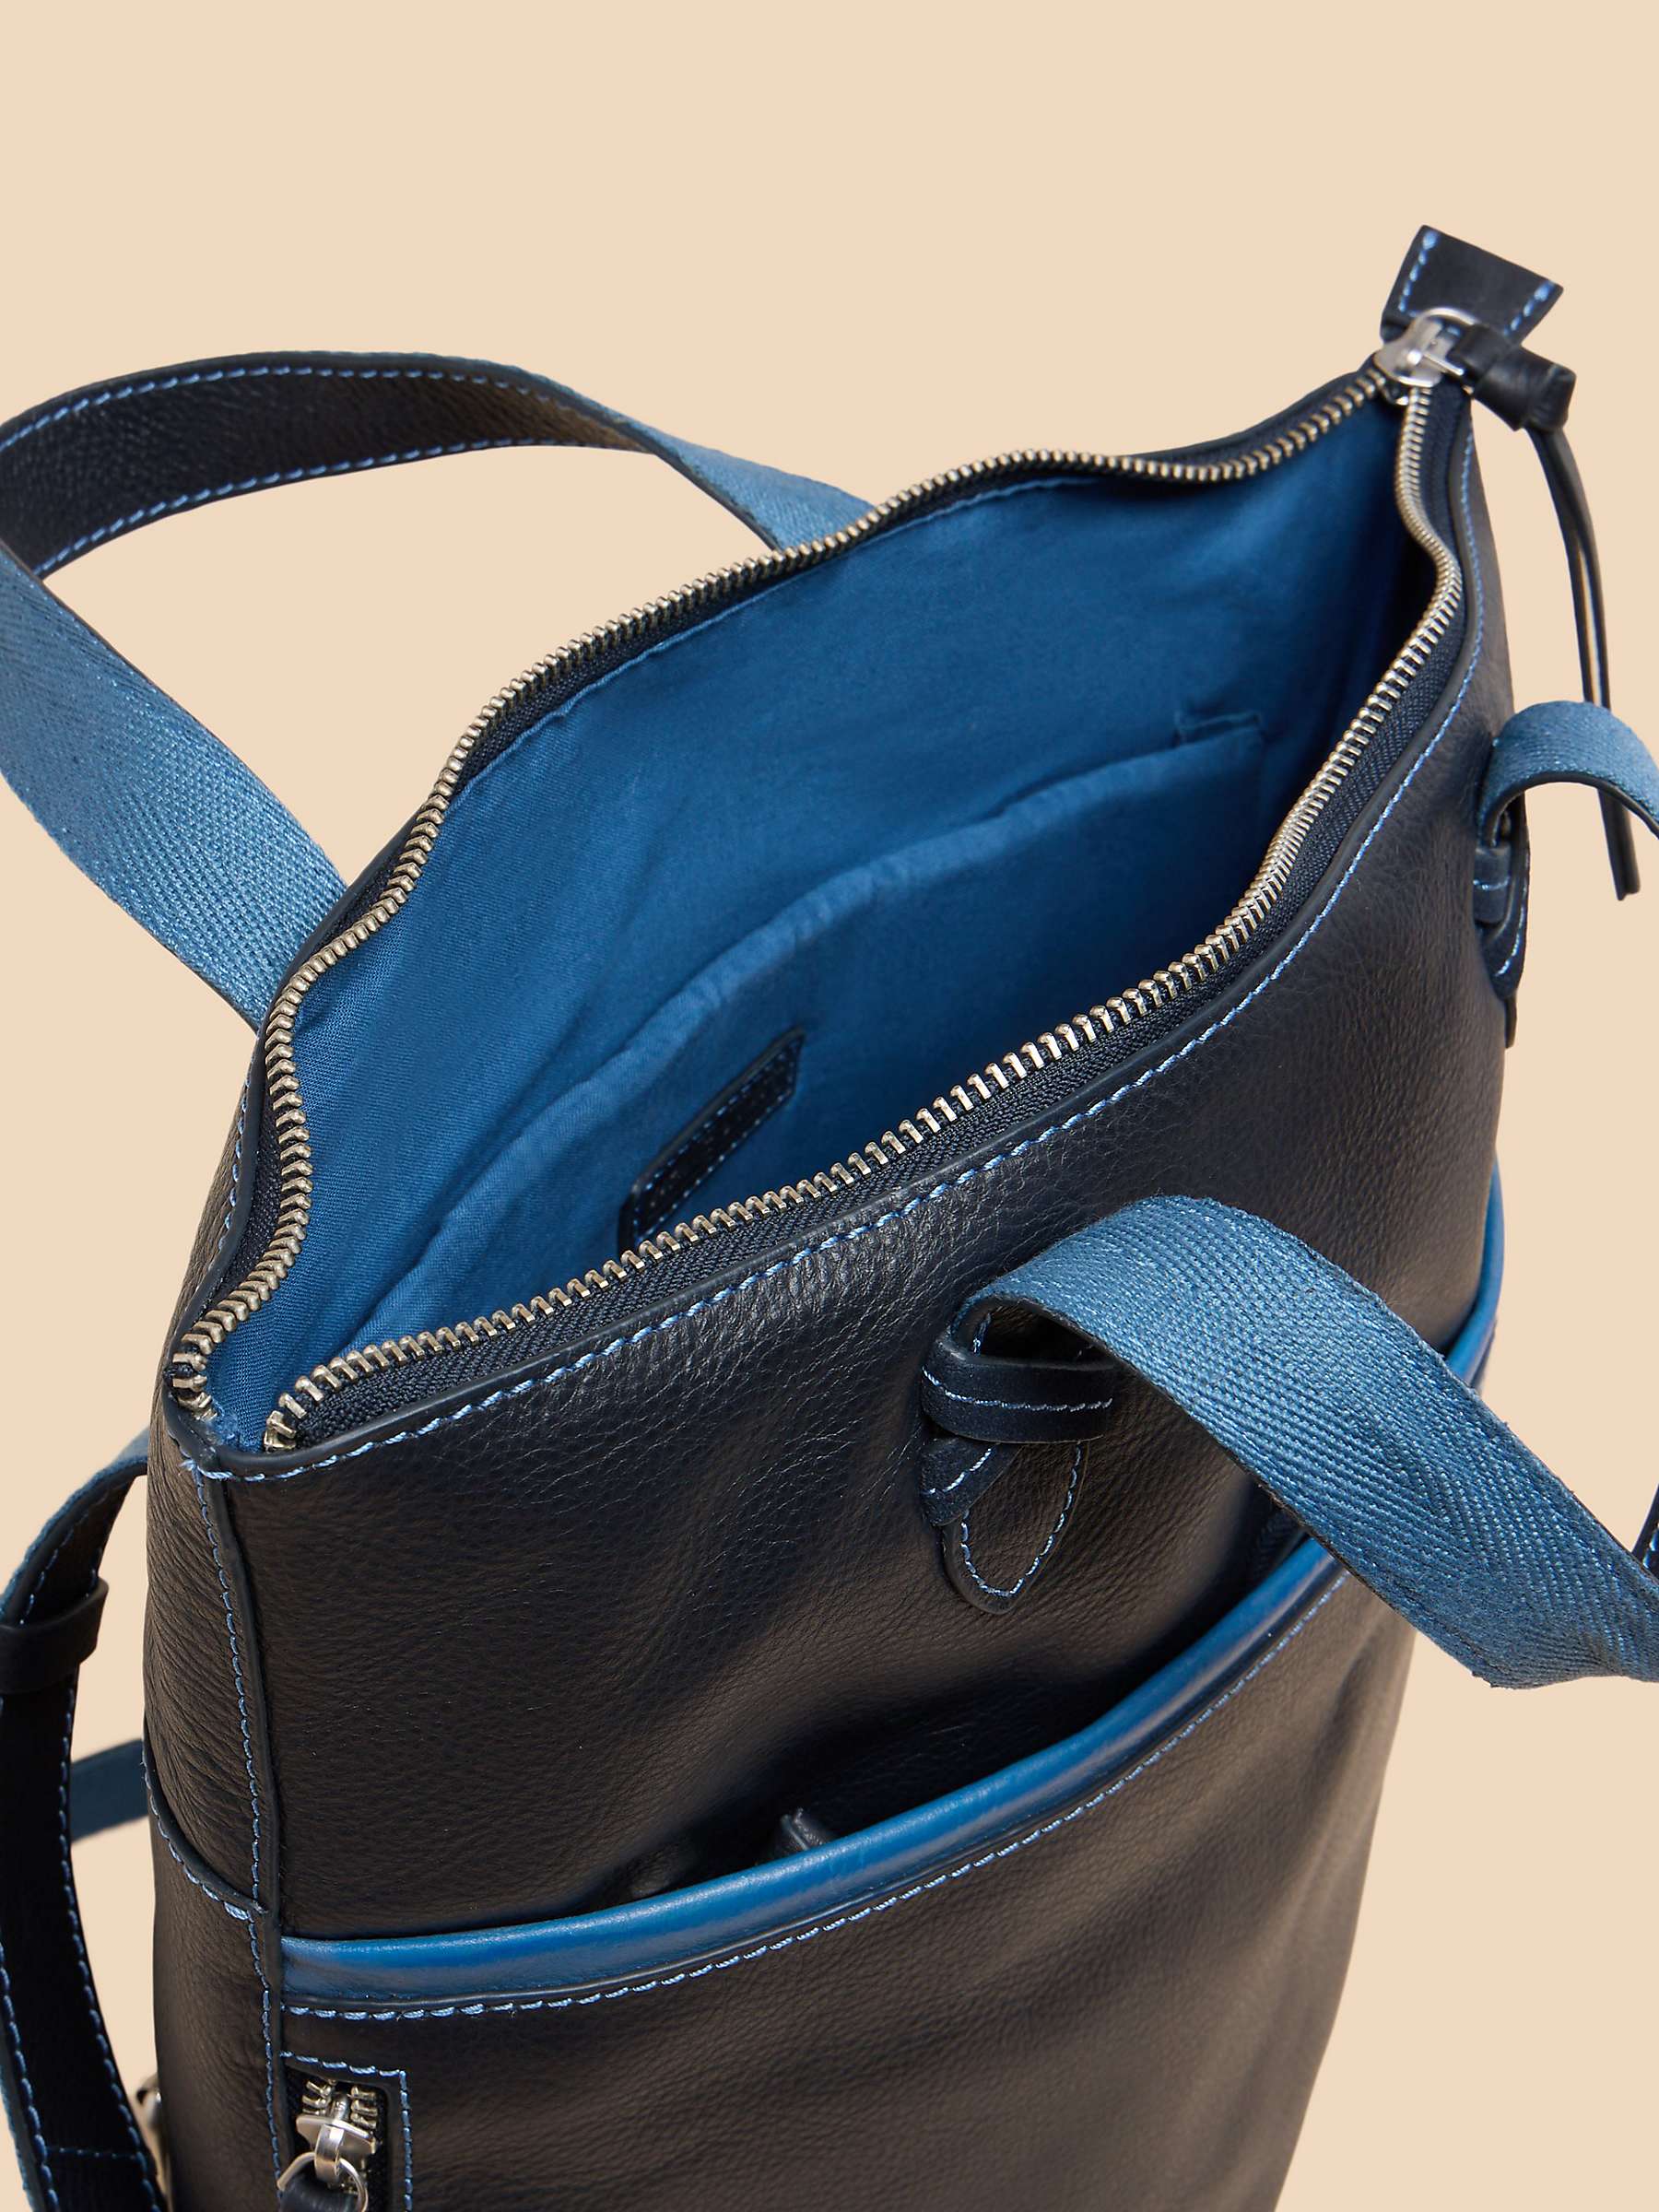 Buy White Stuff Convertible Leather Backpack Online at johnlewis.com